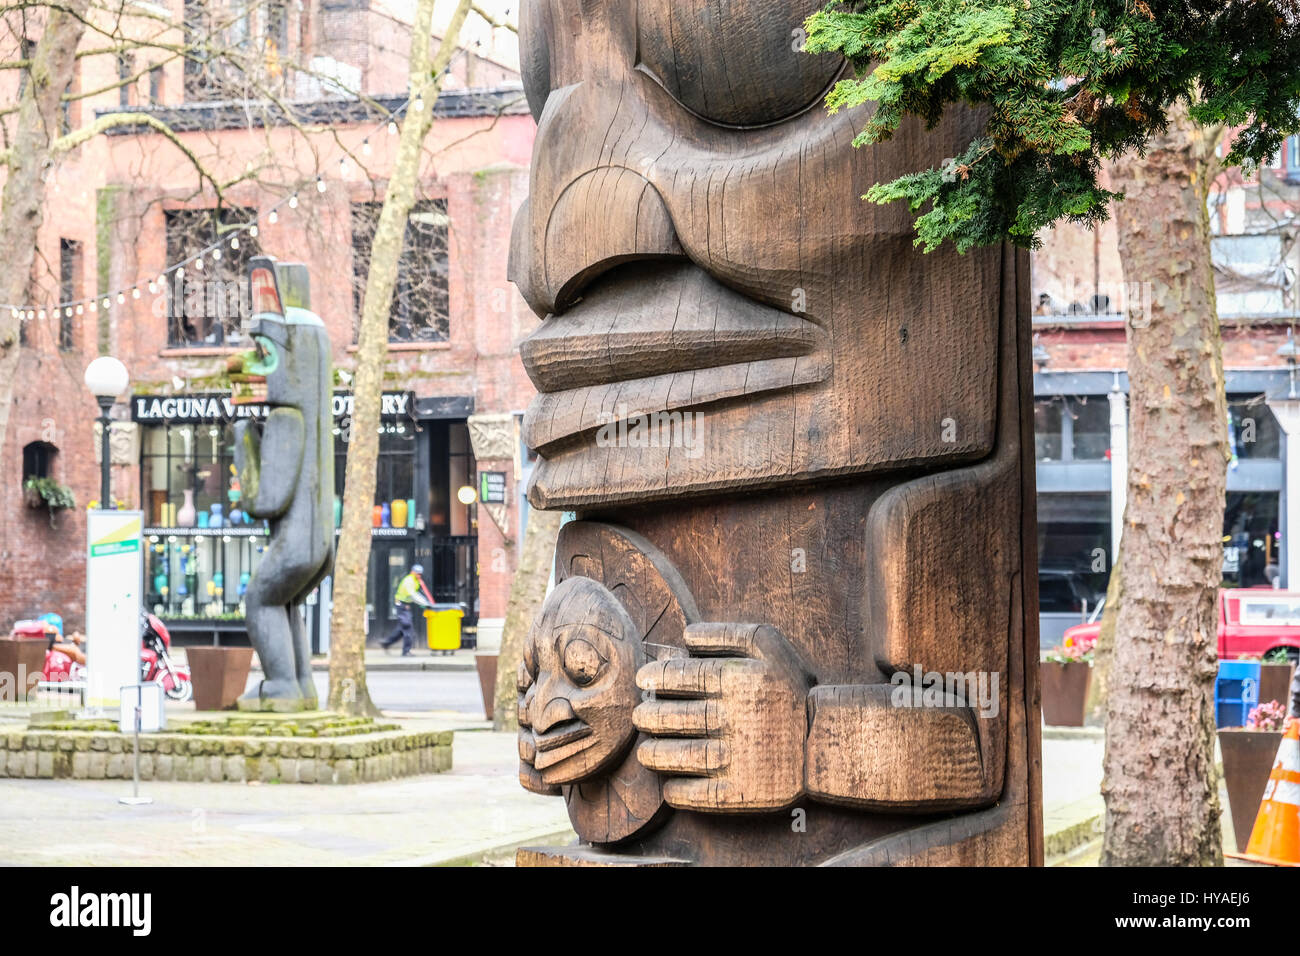 Two Northwest native American totem poles in Seattle's Pioneer Square.  Nearly empty street.  Horizontal image. Stock Photo